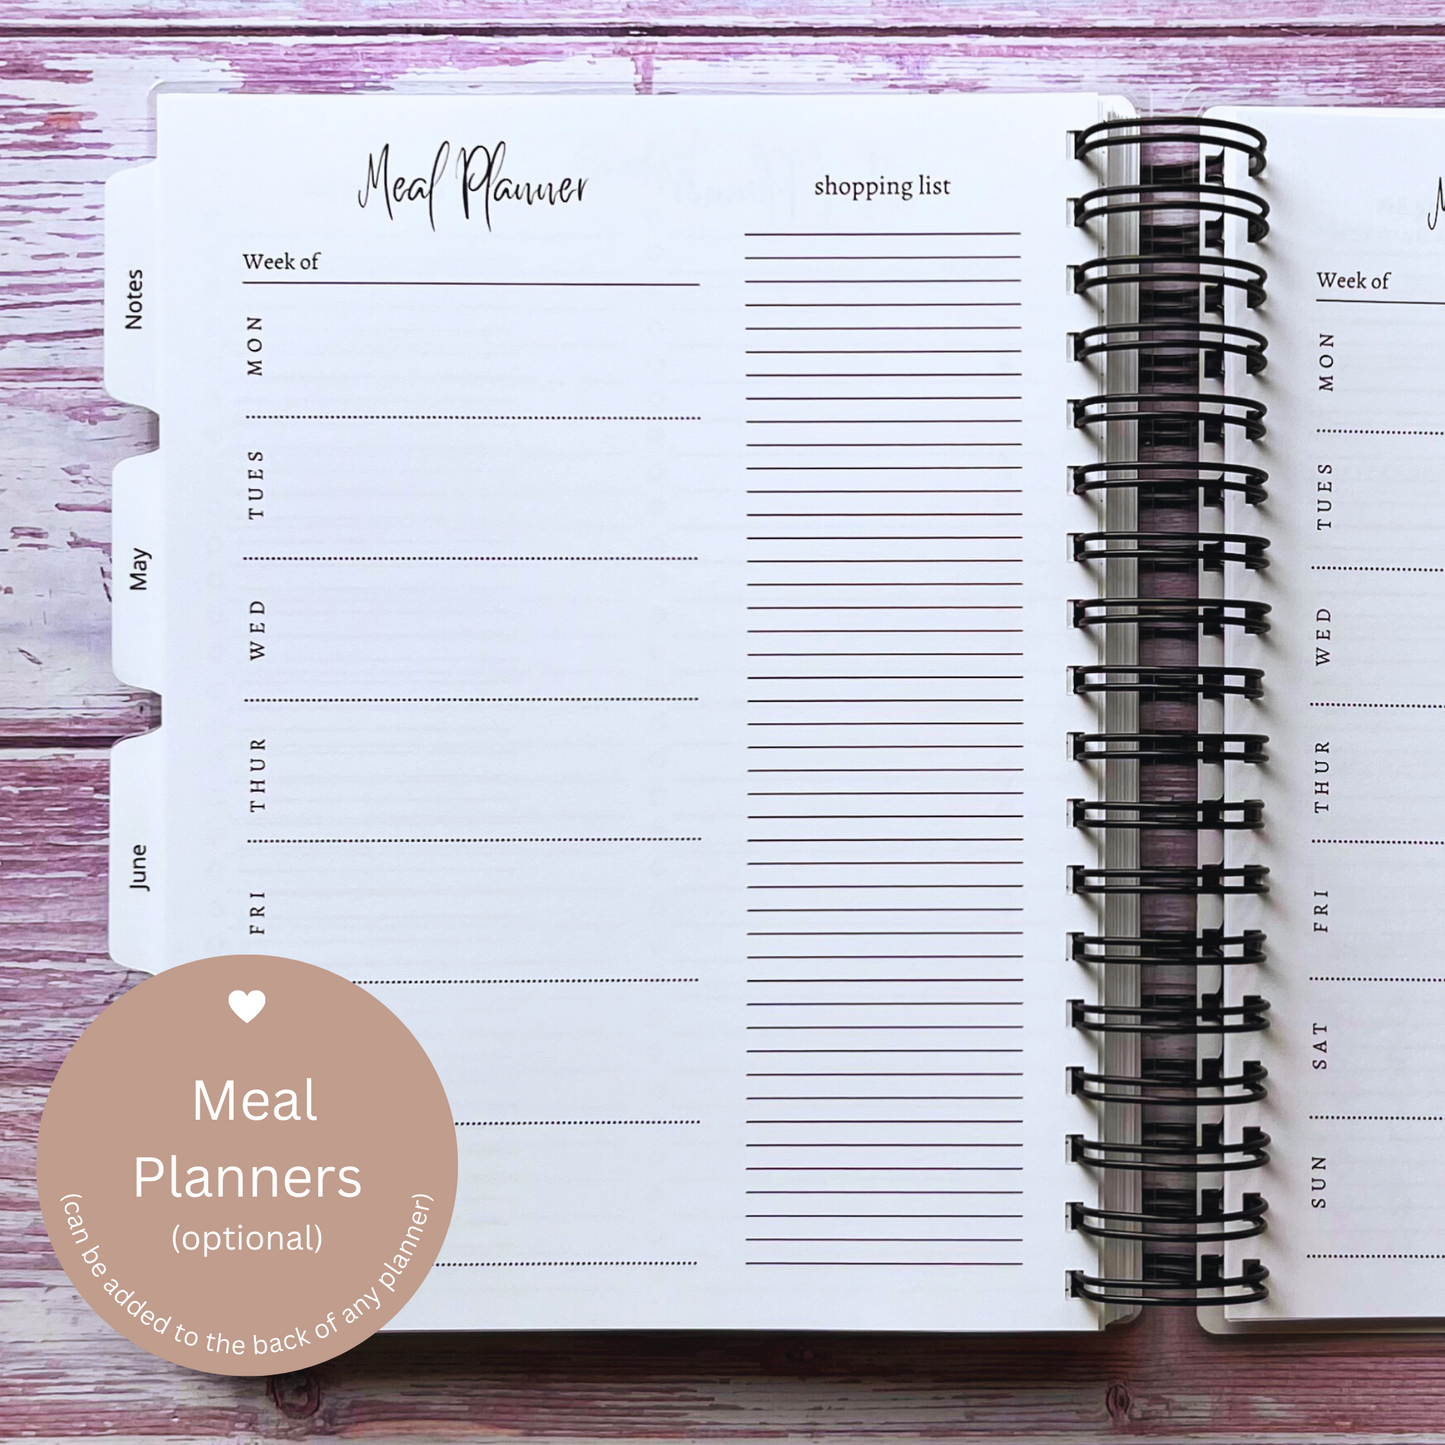 Personalized 6 Month Daily Planner | Blue Hummingbird Garden